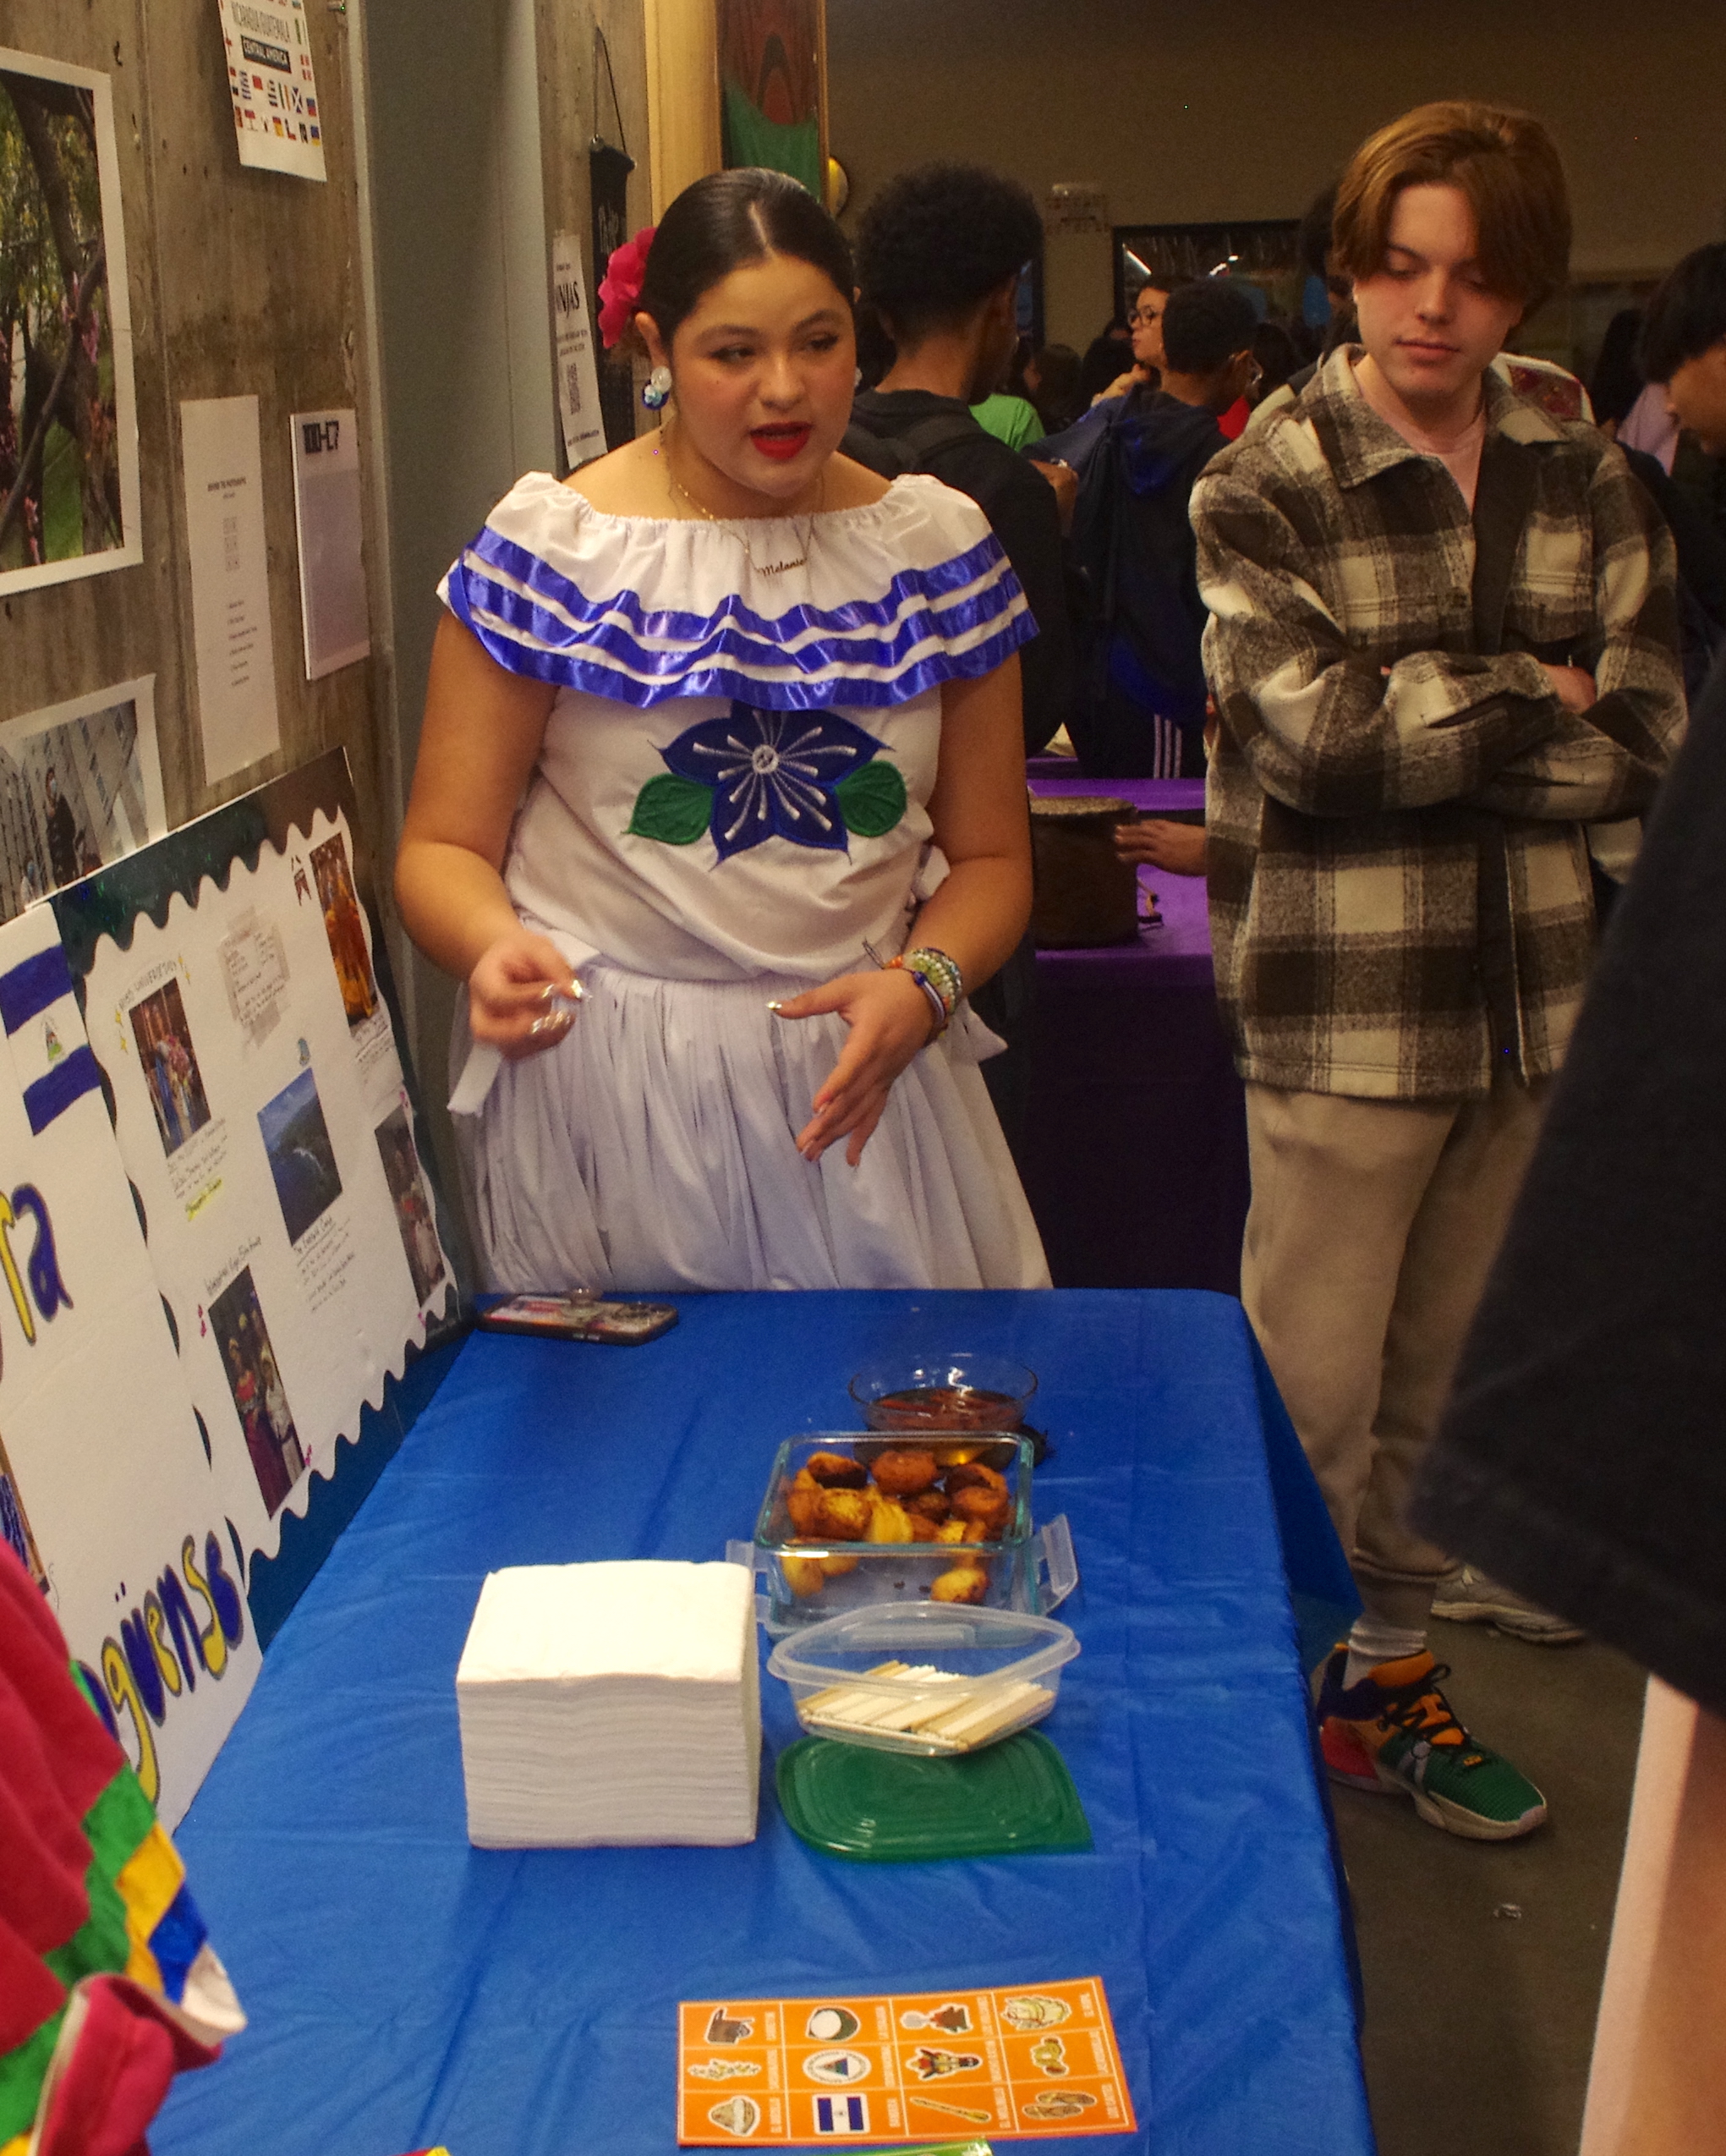 Student talking with others about her culture